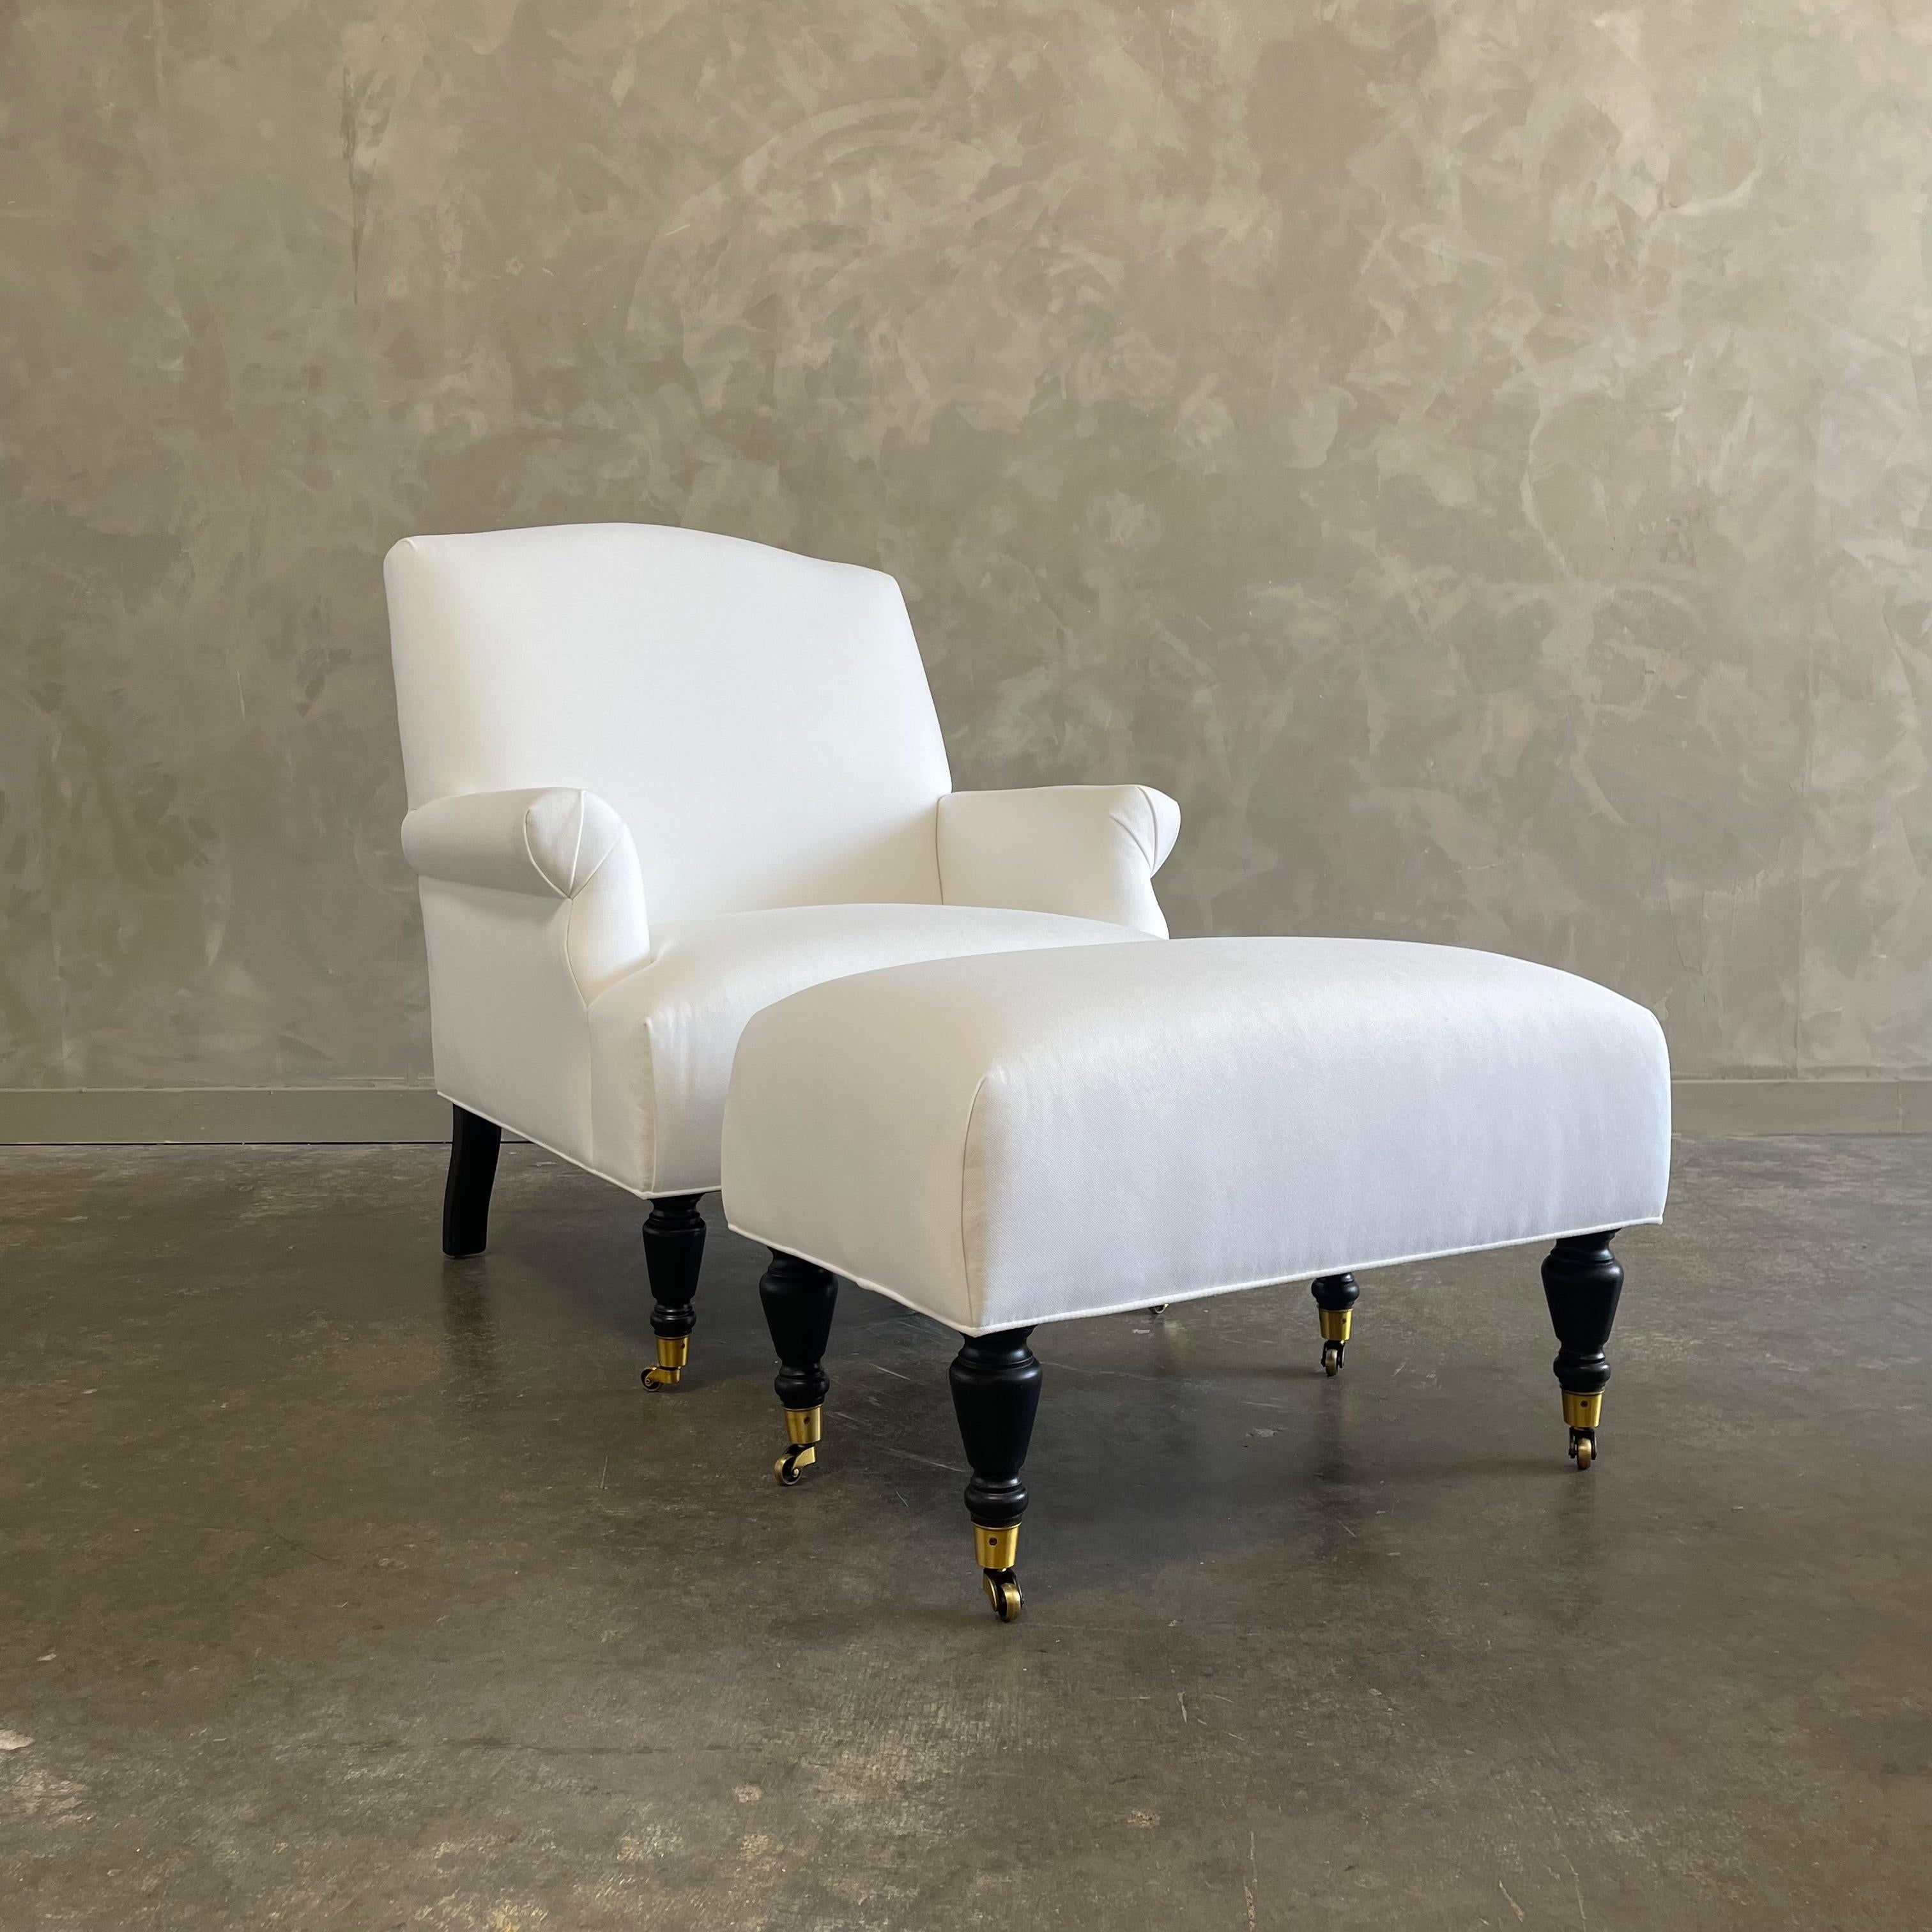 Contemporary Modern Upholstered Linen Chair & Ottoman For Sale